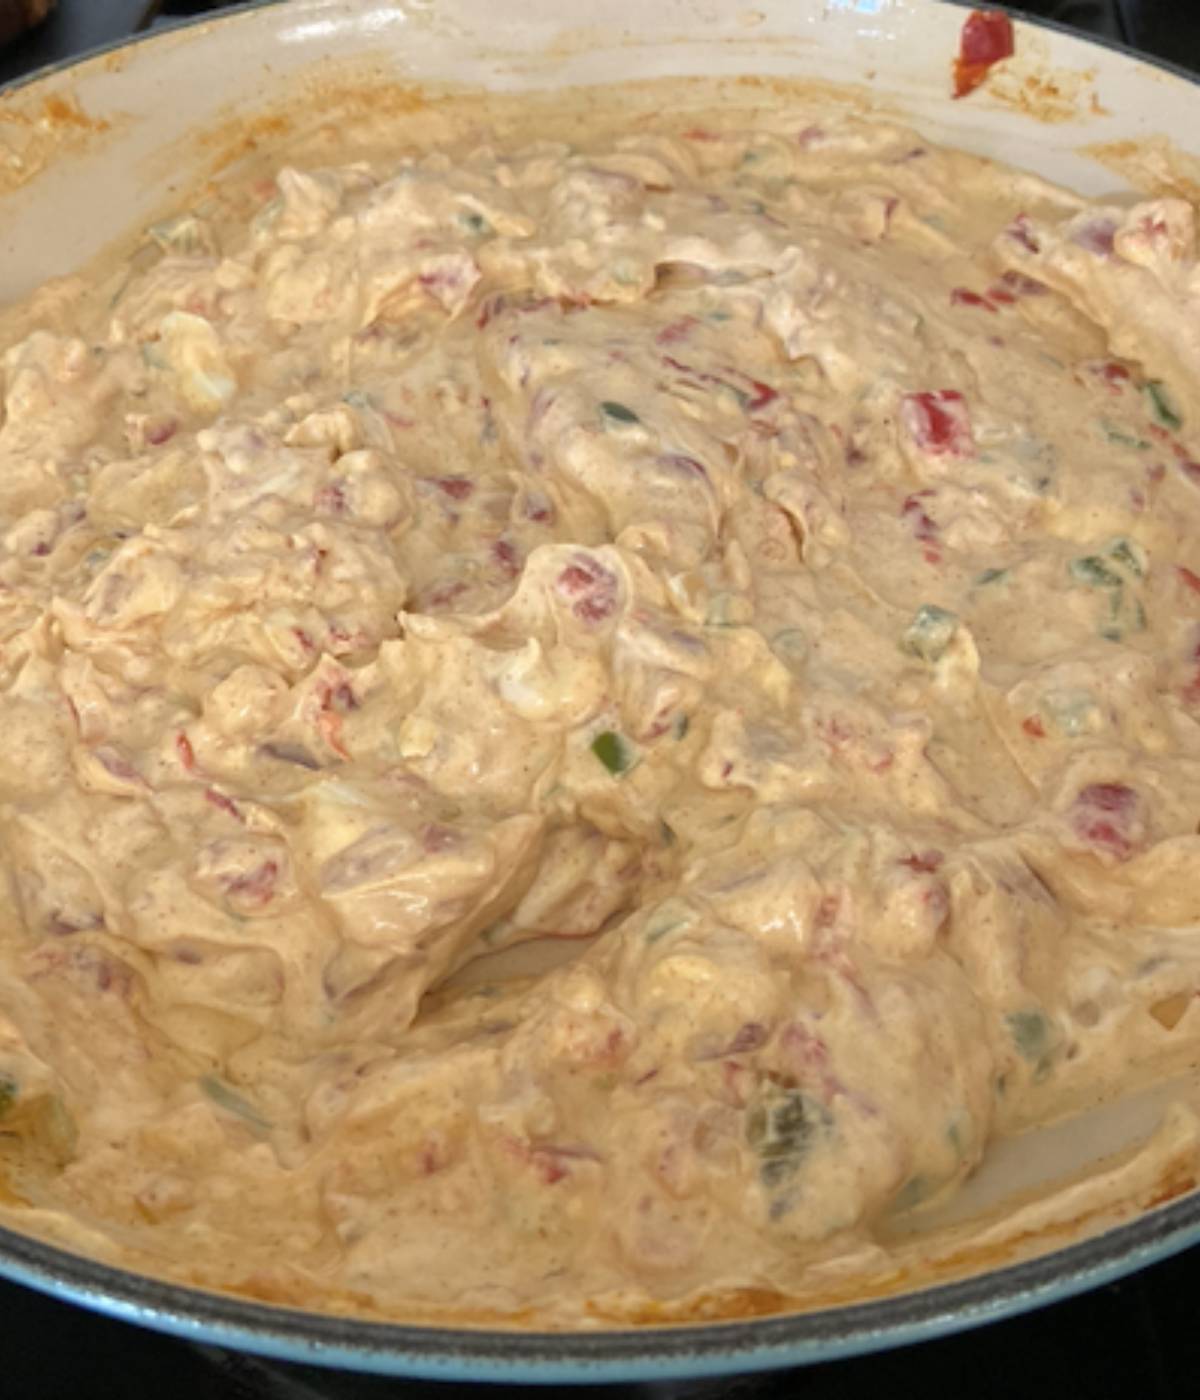 Cream cheese added into jalapeno dip.